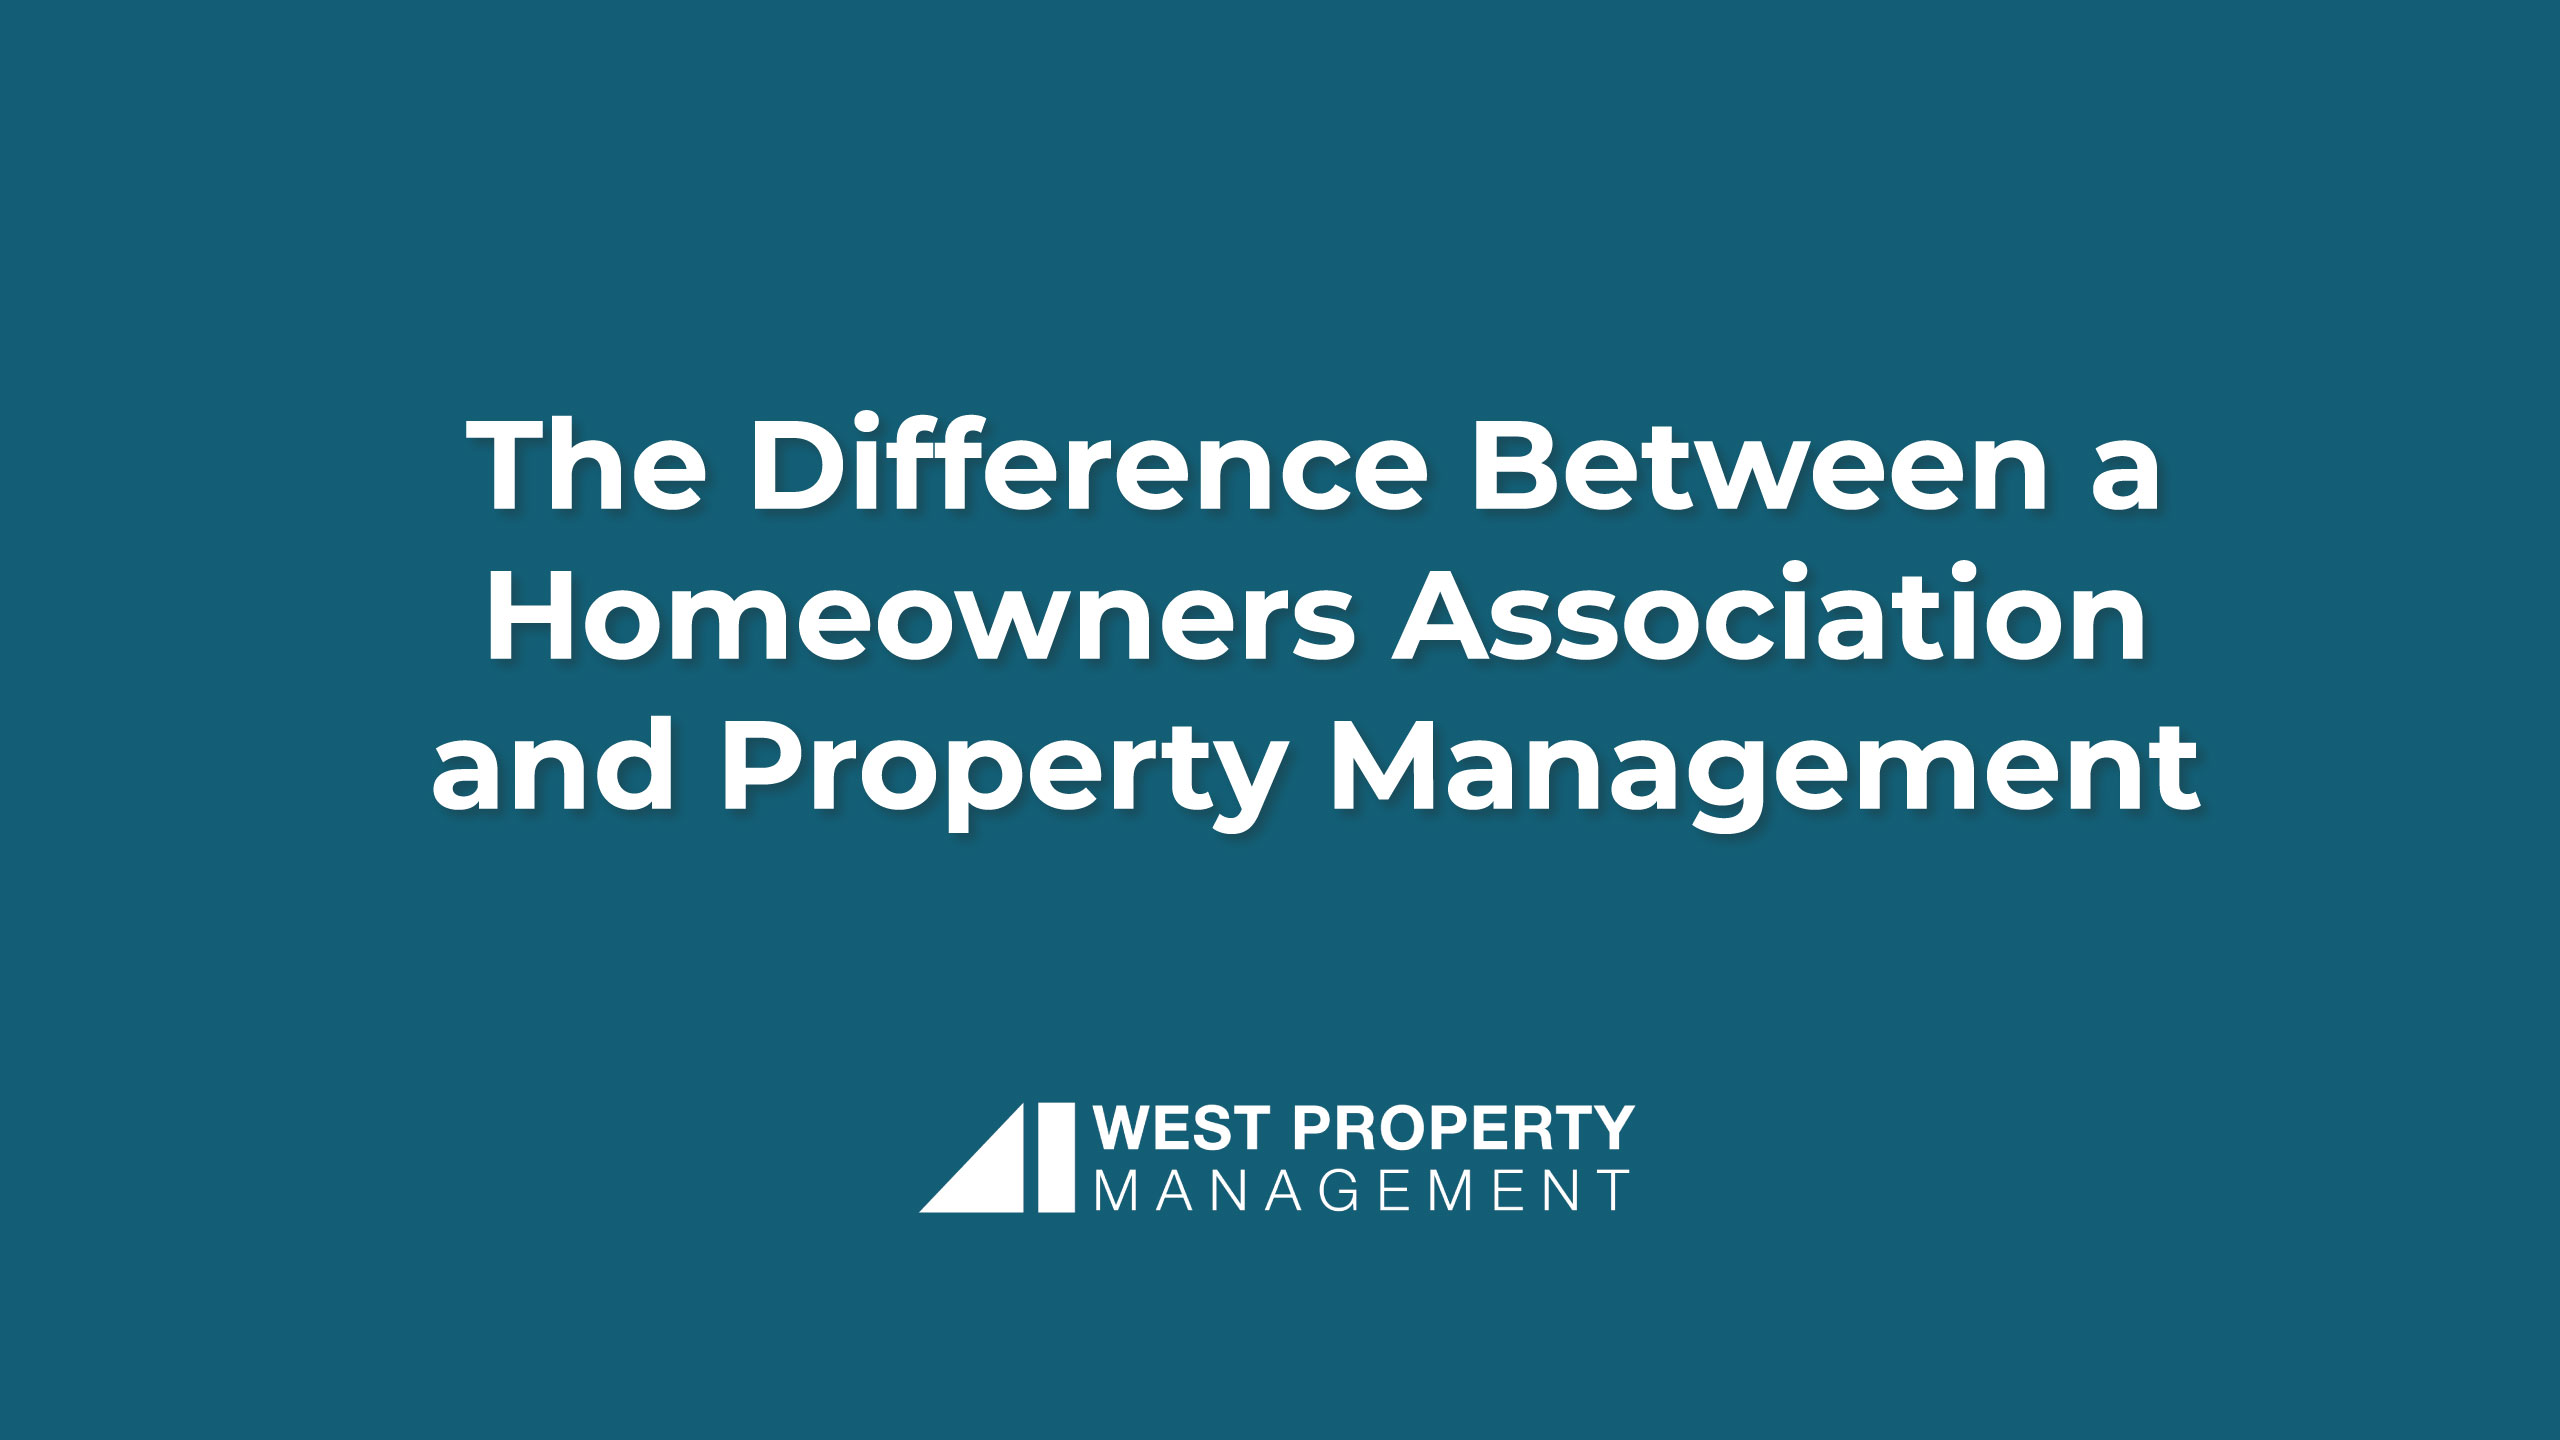 The Difference Between a Homeowners Association and Property Management